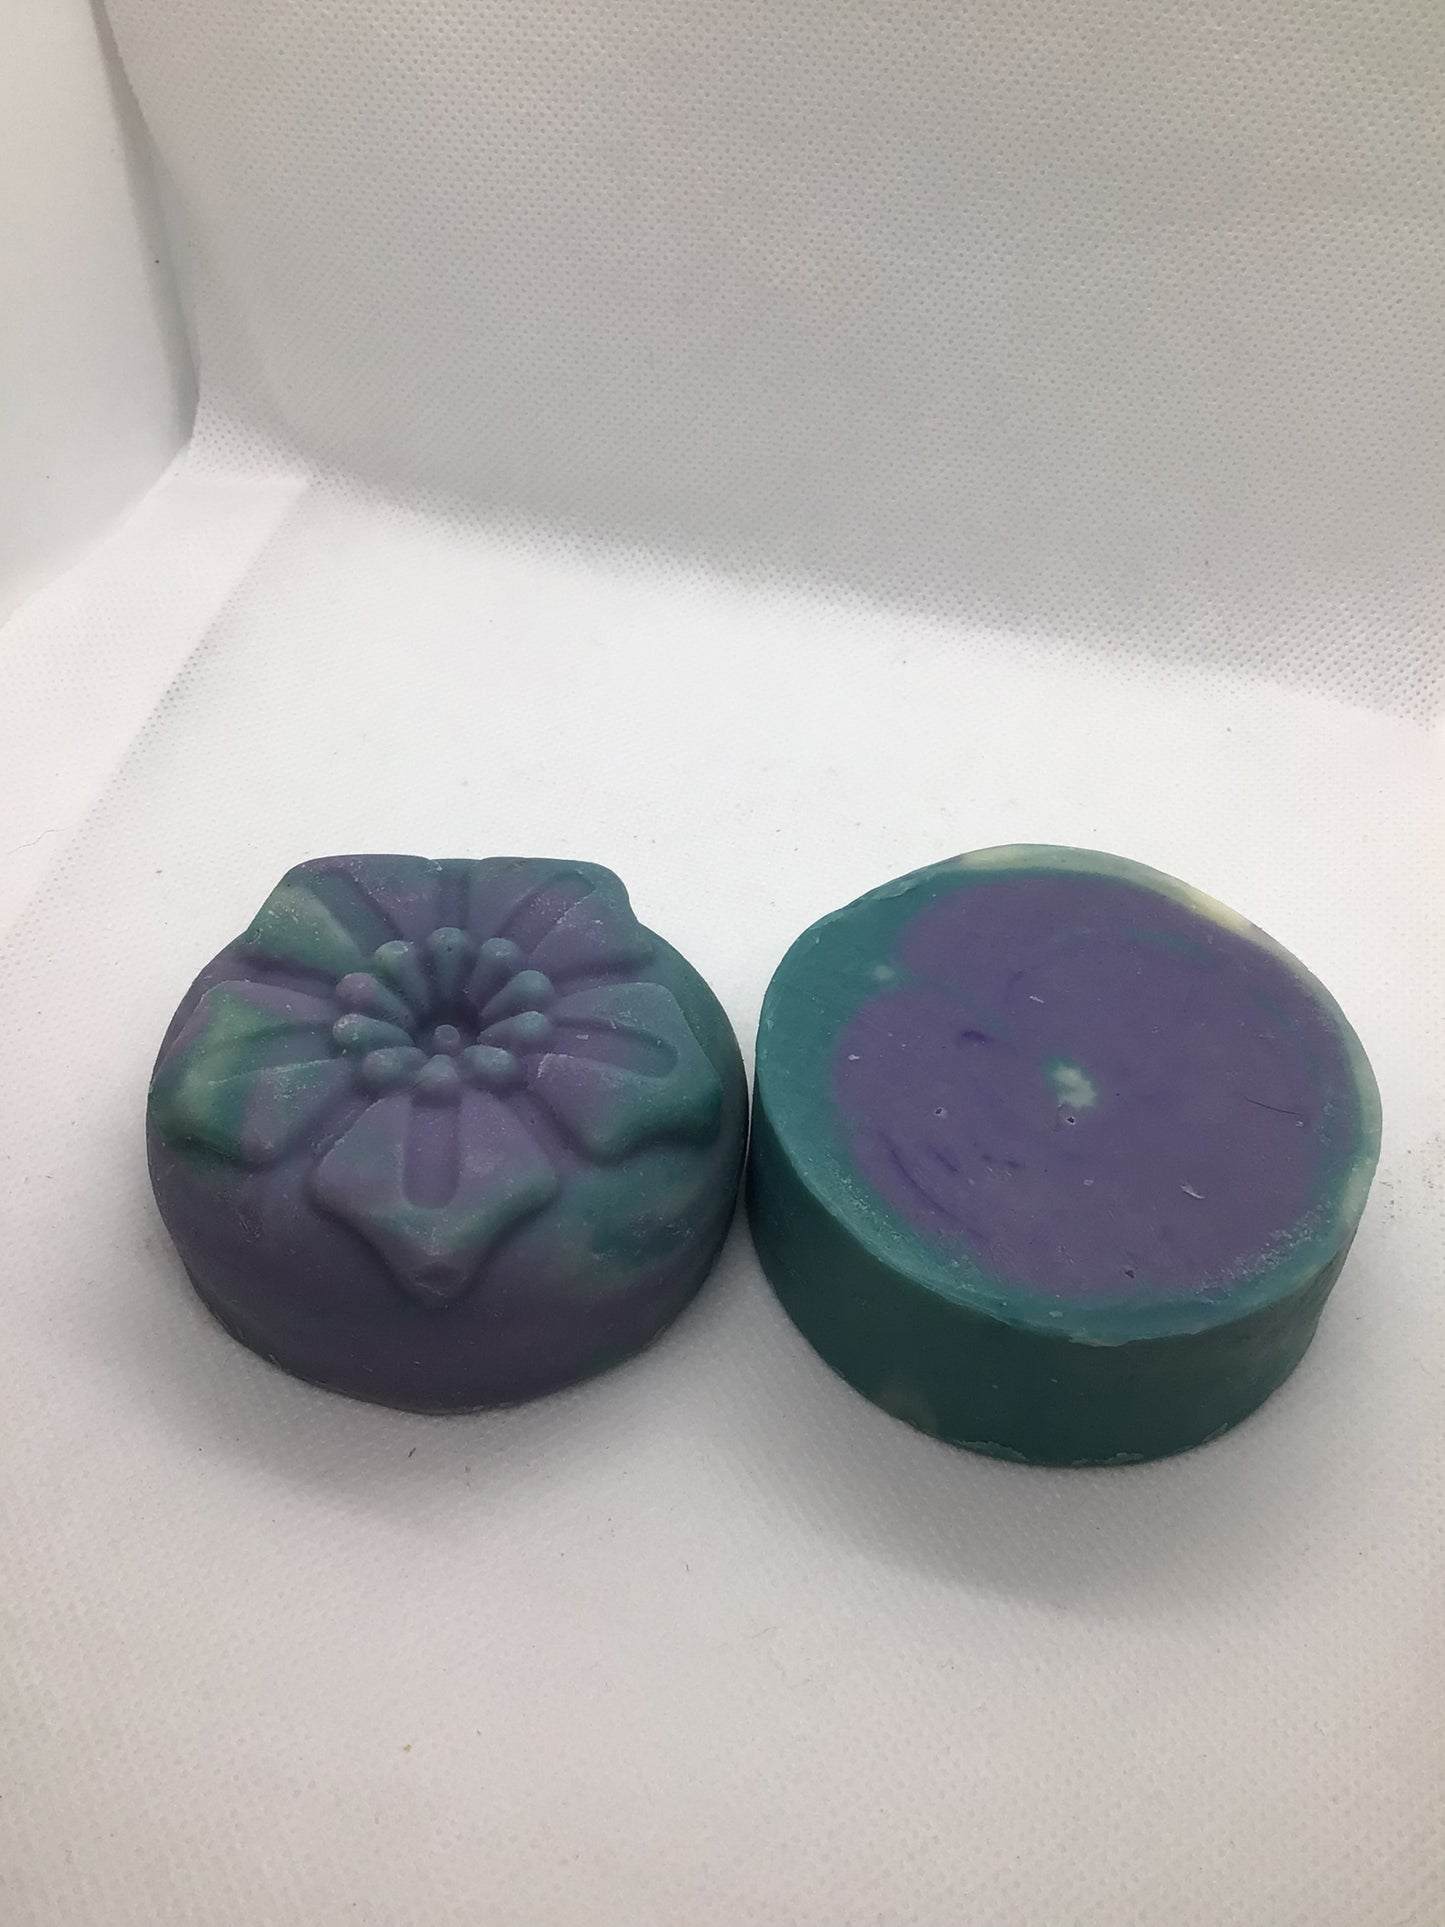 one round soap colored in blue purple and white, one flower shaped soap colored in blue and purple.